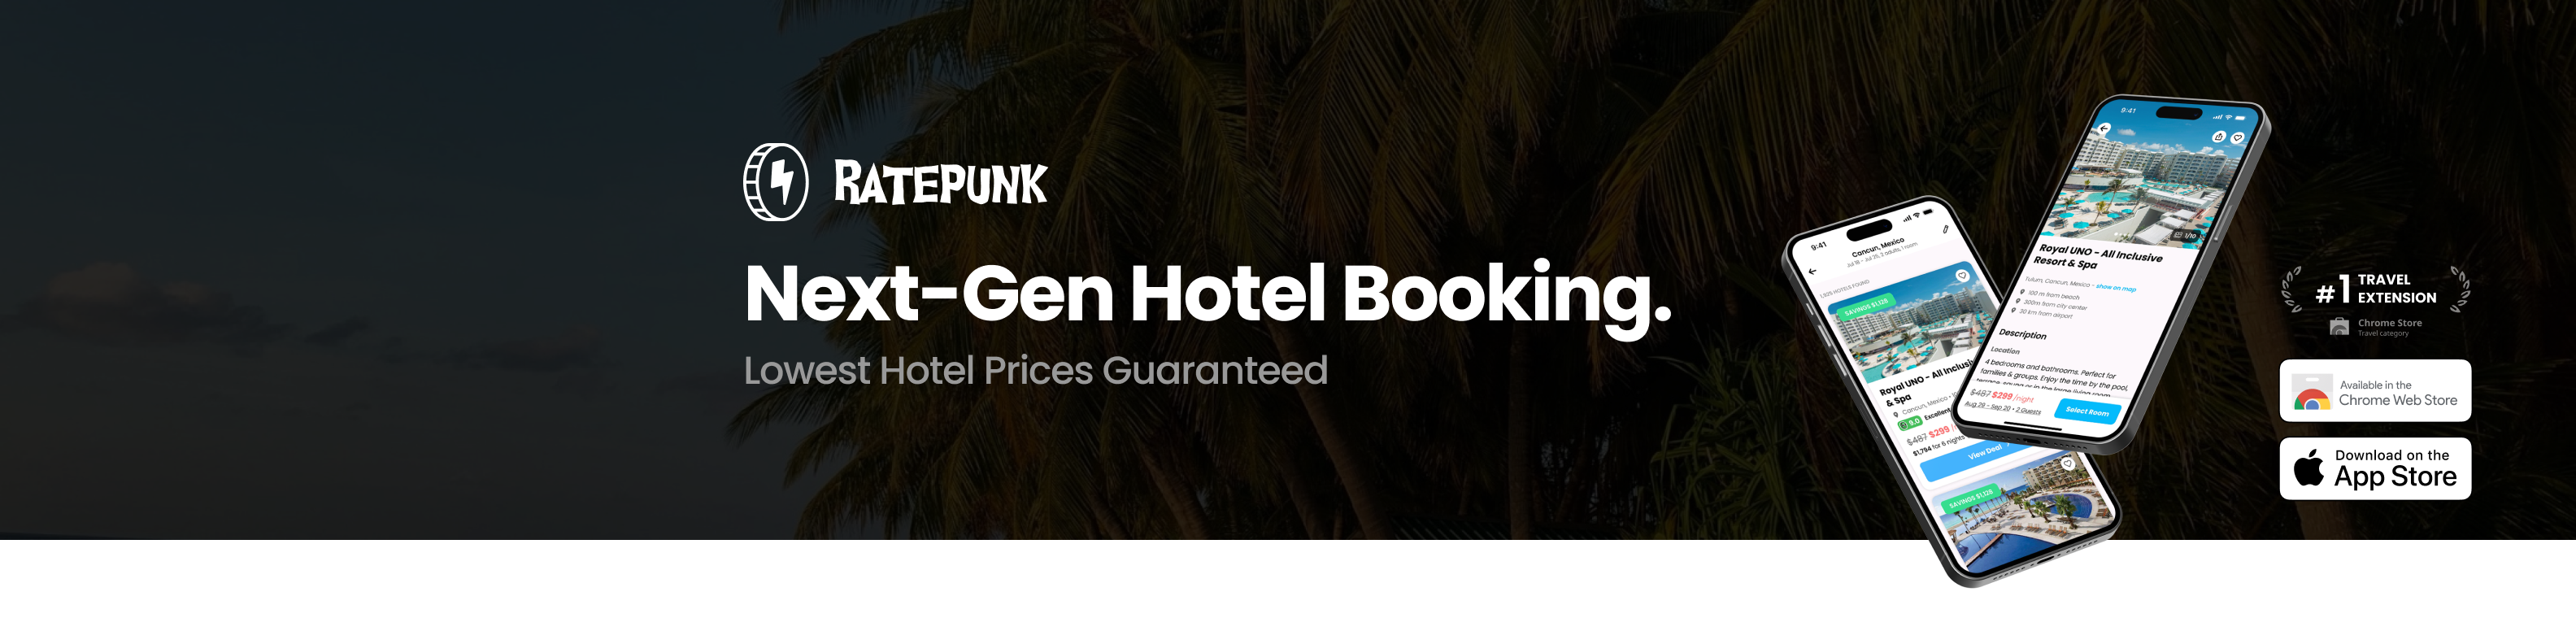 Next-gen hotel booking - lowest otel prices guaranteed. ratepunk ios app, ratepunk browser extension 